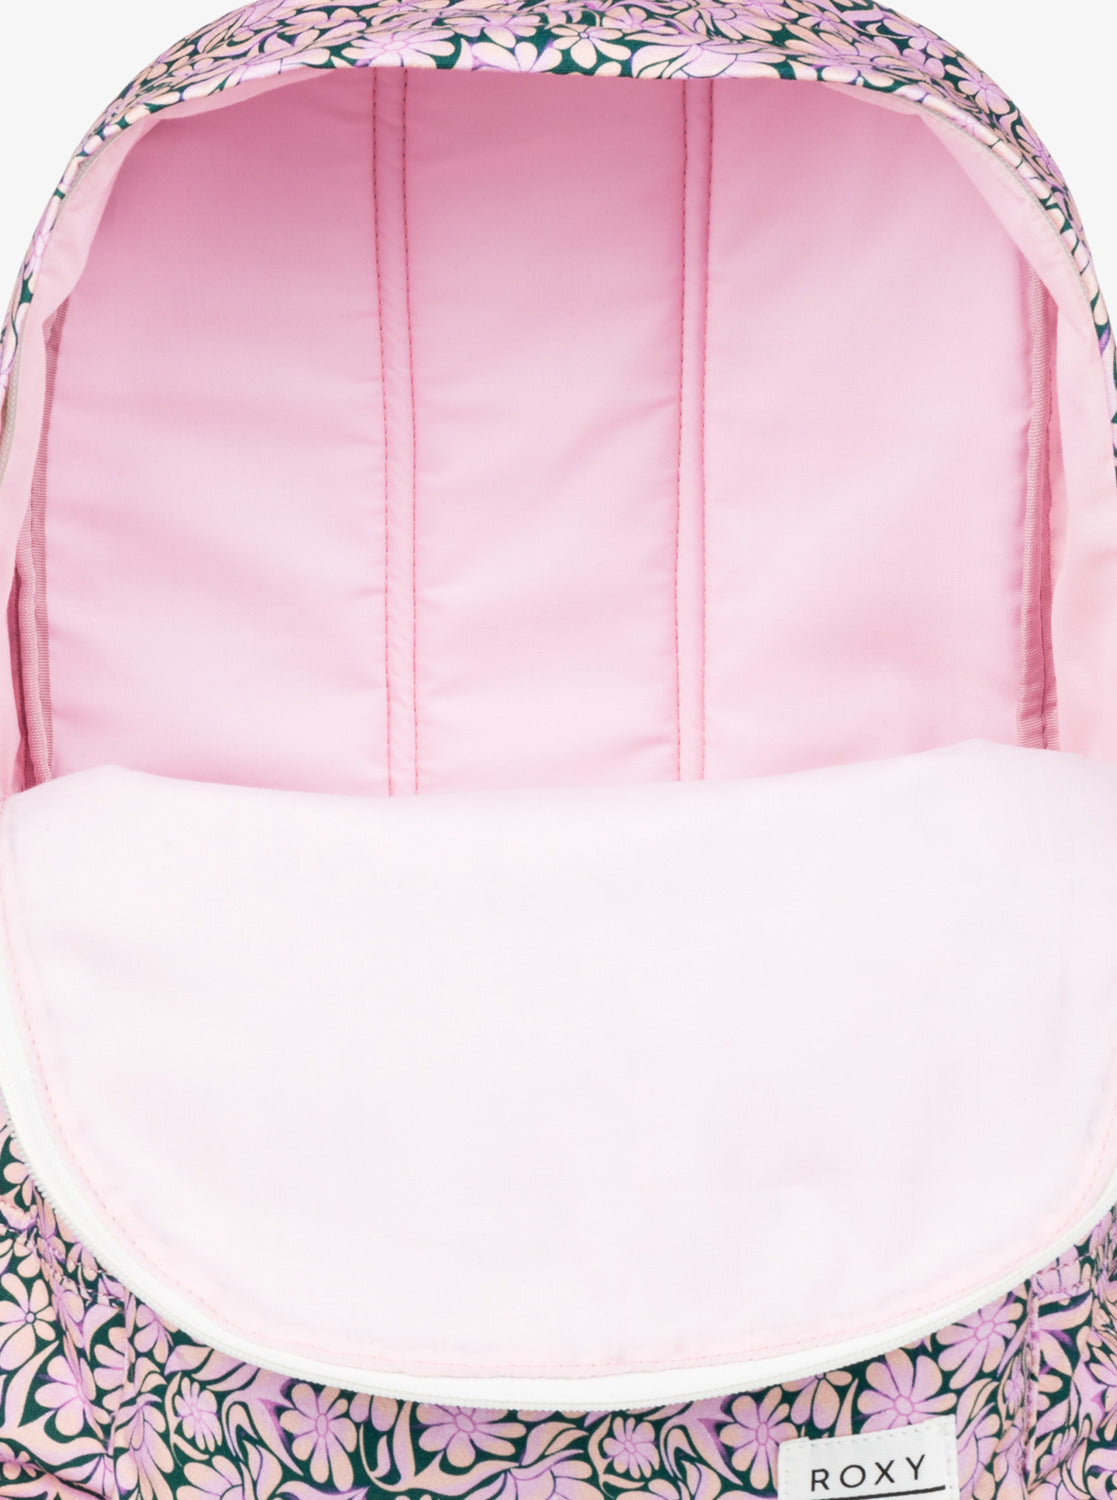 ROXY Sugar Baby Canvas 16L Small Backpack